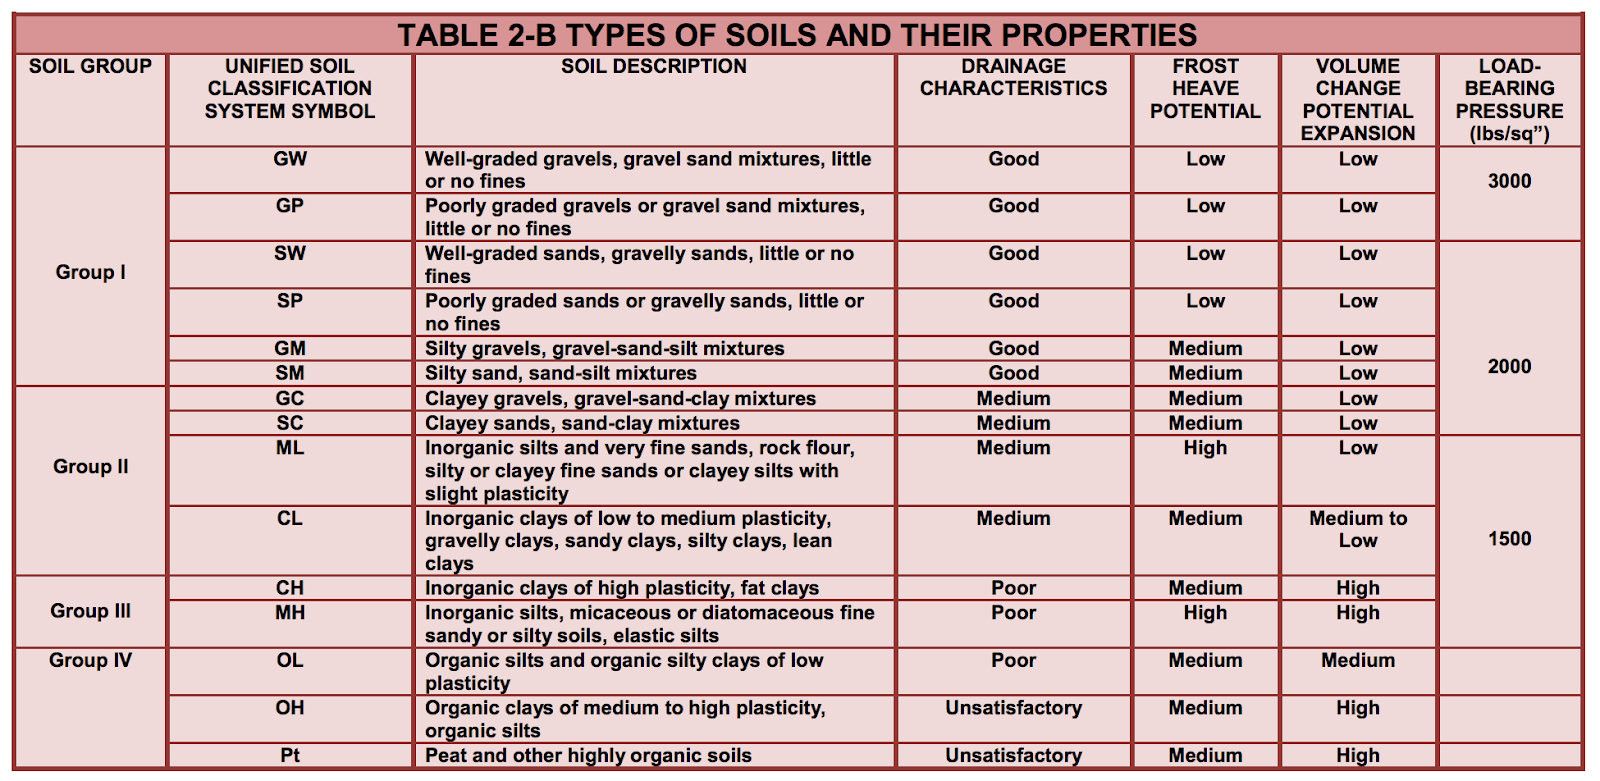 A great table from the City of Grand Rapids that examines several types of soil and their corresponding properties. 